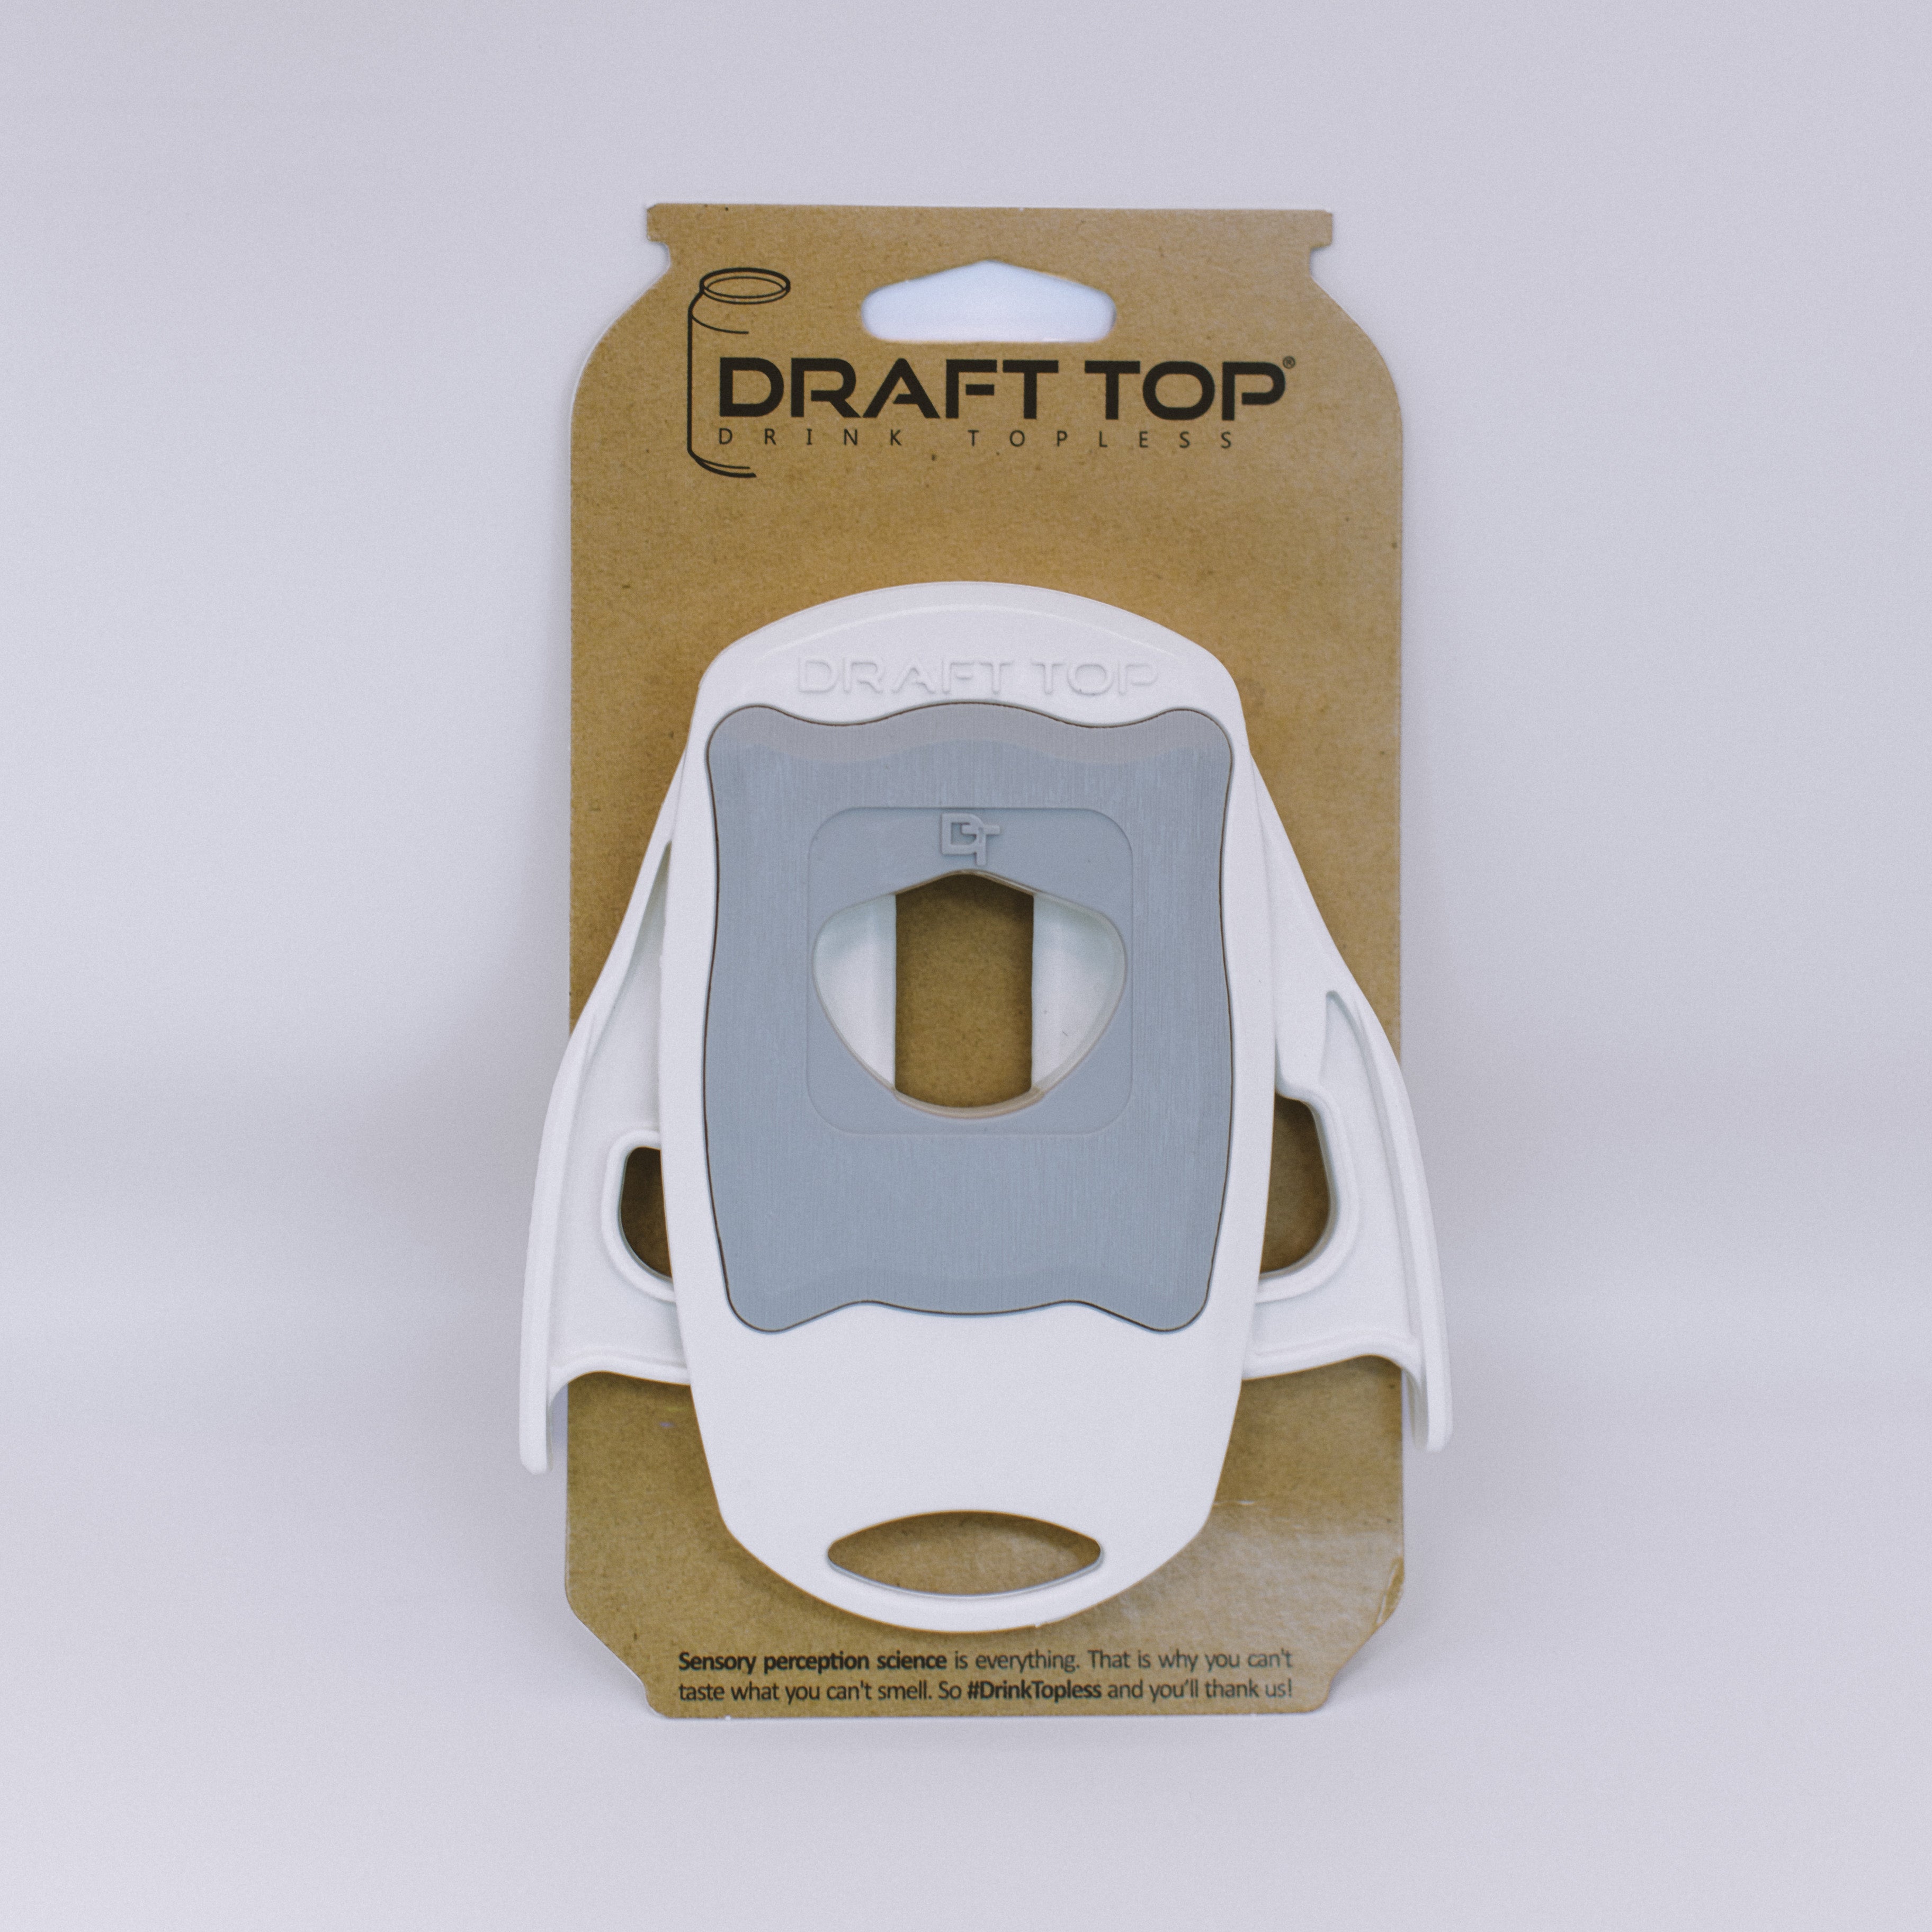 Draft Top LIFT – Luggage Shop of Lubbock